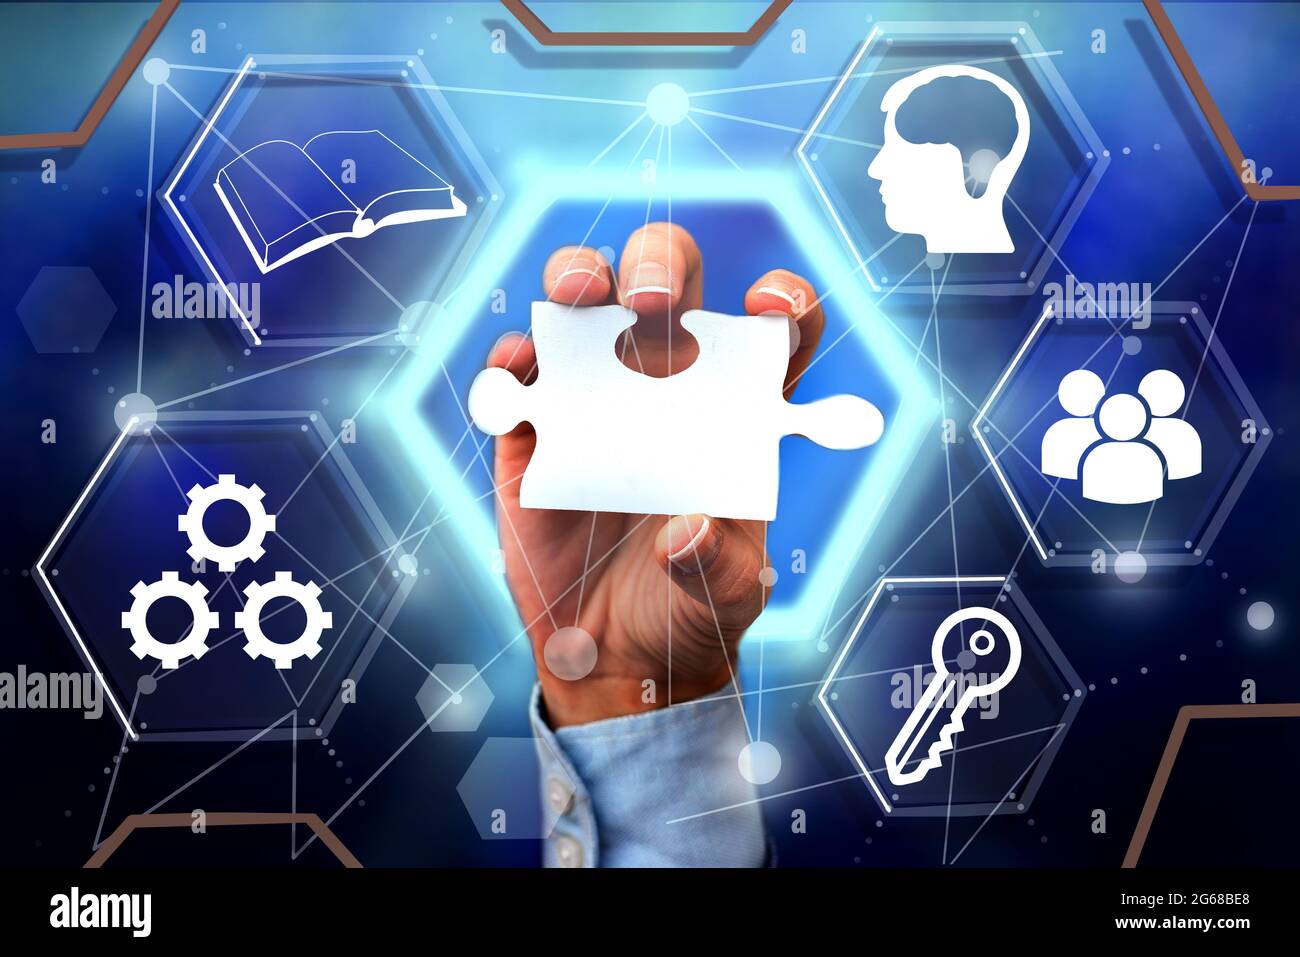 Hand Holding Jigsaw Puzzle Piece Unlocking New Futuristic Technologies.  Palm Carrying Puzzles Part Displaying Solving Late Innovative Virtual Ideas  Stock Photo - Alamy